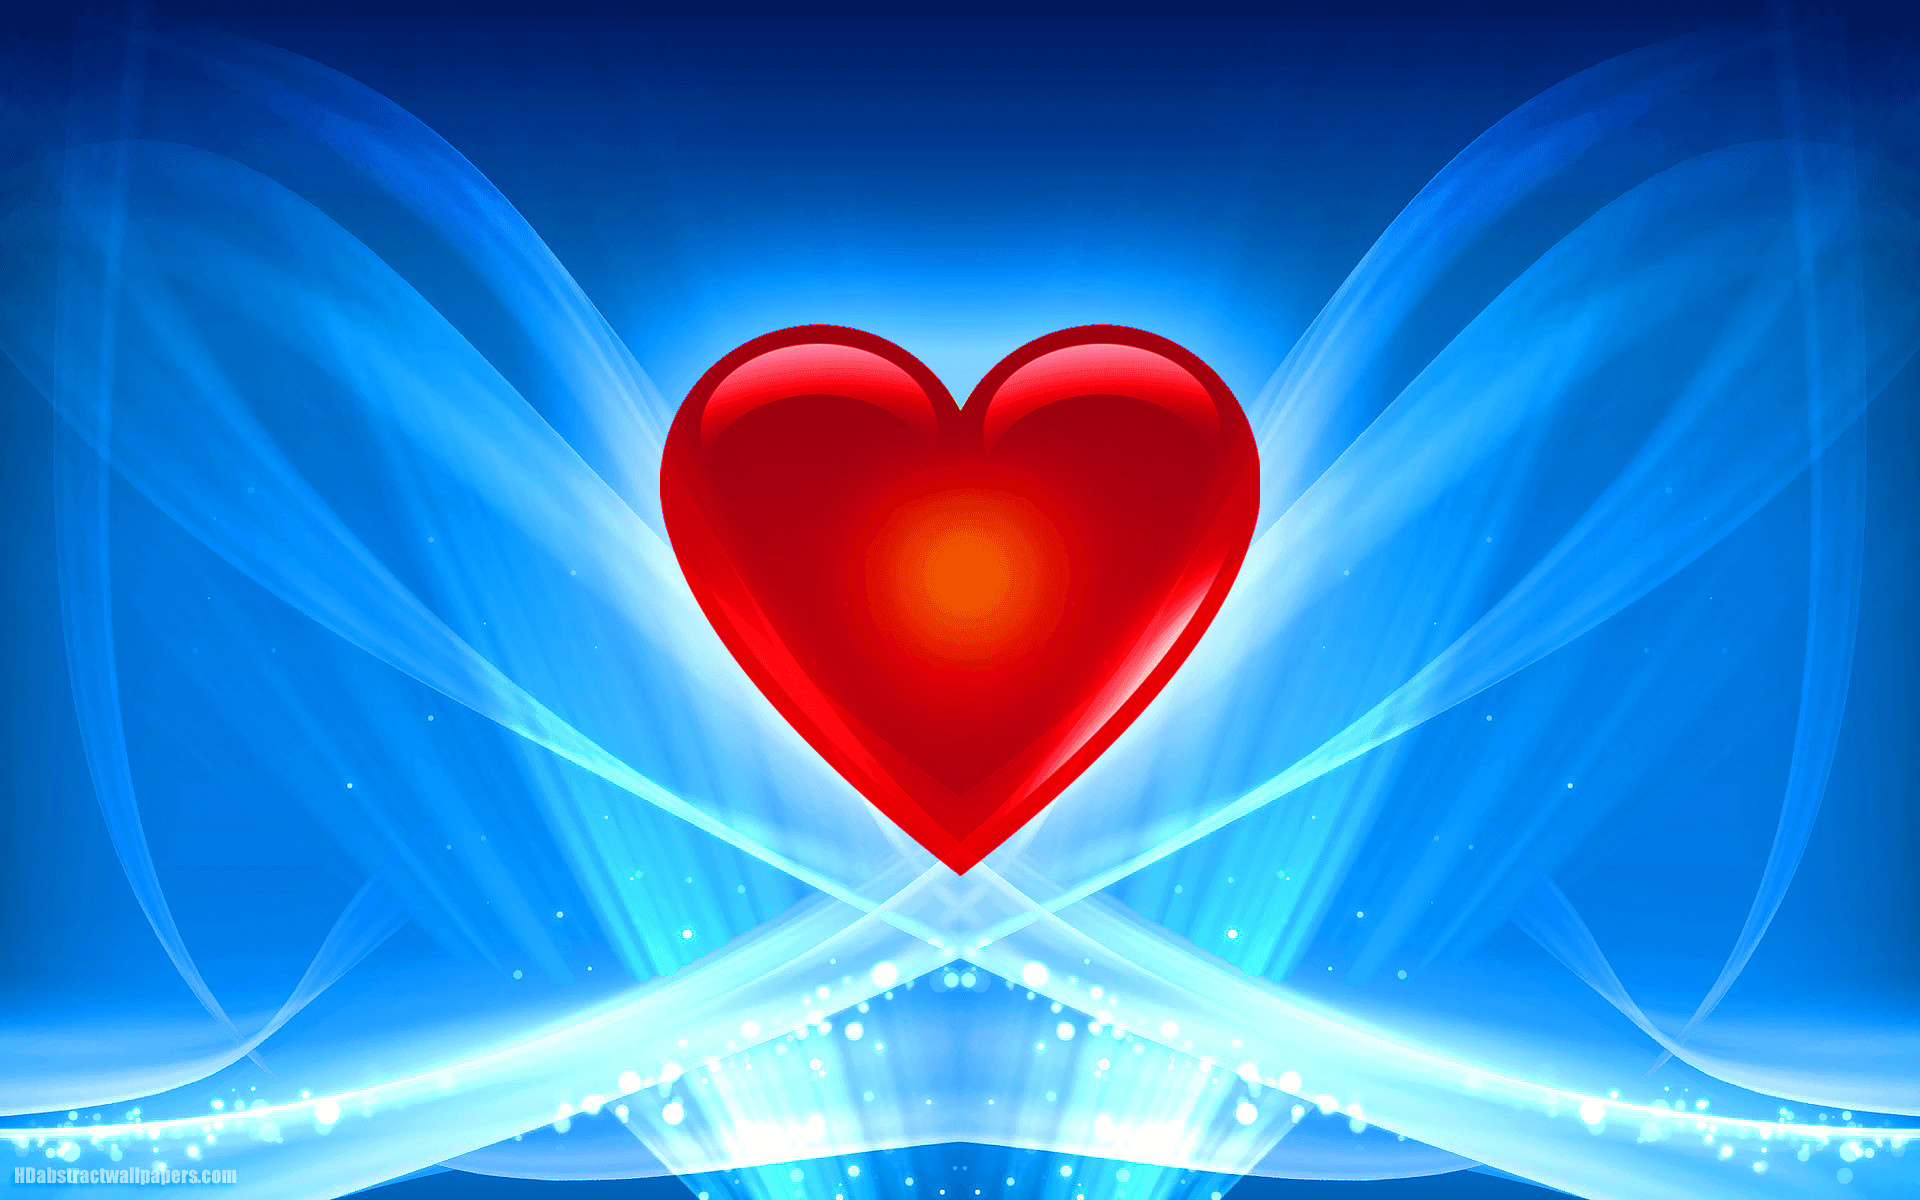 Abstract blue wallpaper with red love heart and lights. A very beautiful blue  abstract wallpaper for PC, laptop, tablet or smartphone.